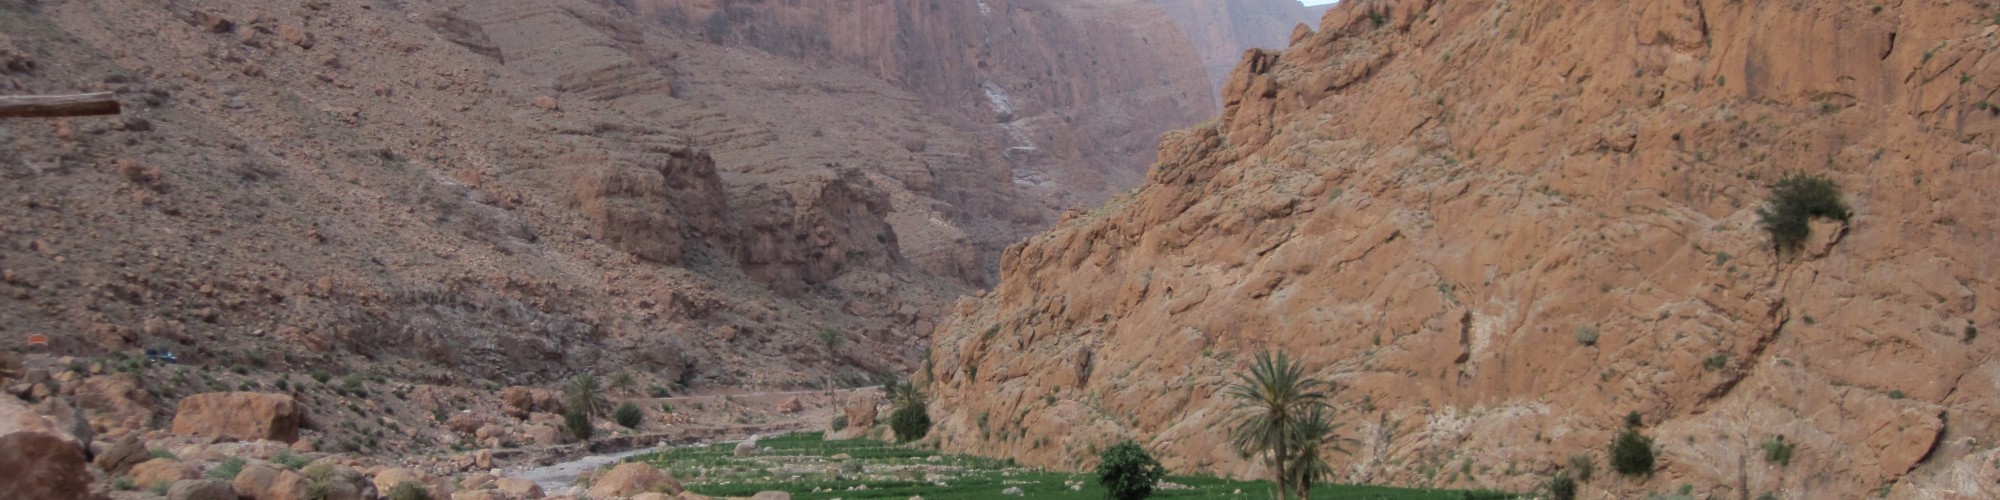 Morocco - Skoura & the Valley of the Kasbahs - Todra Gorge